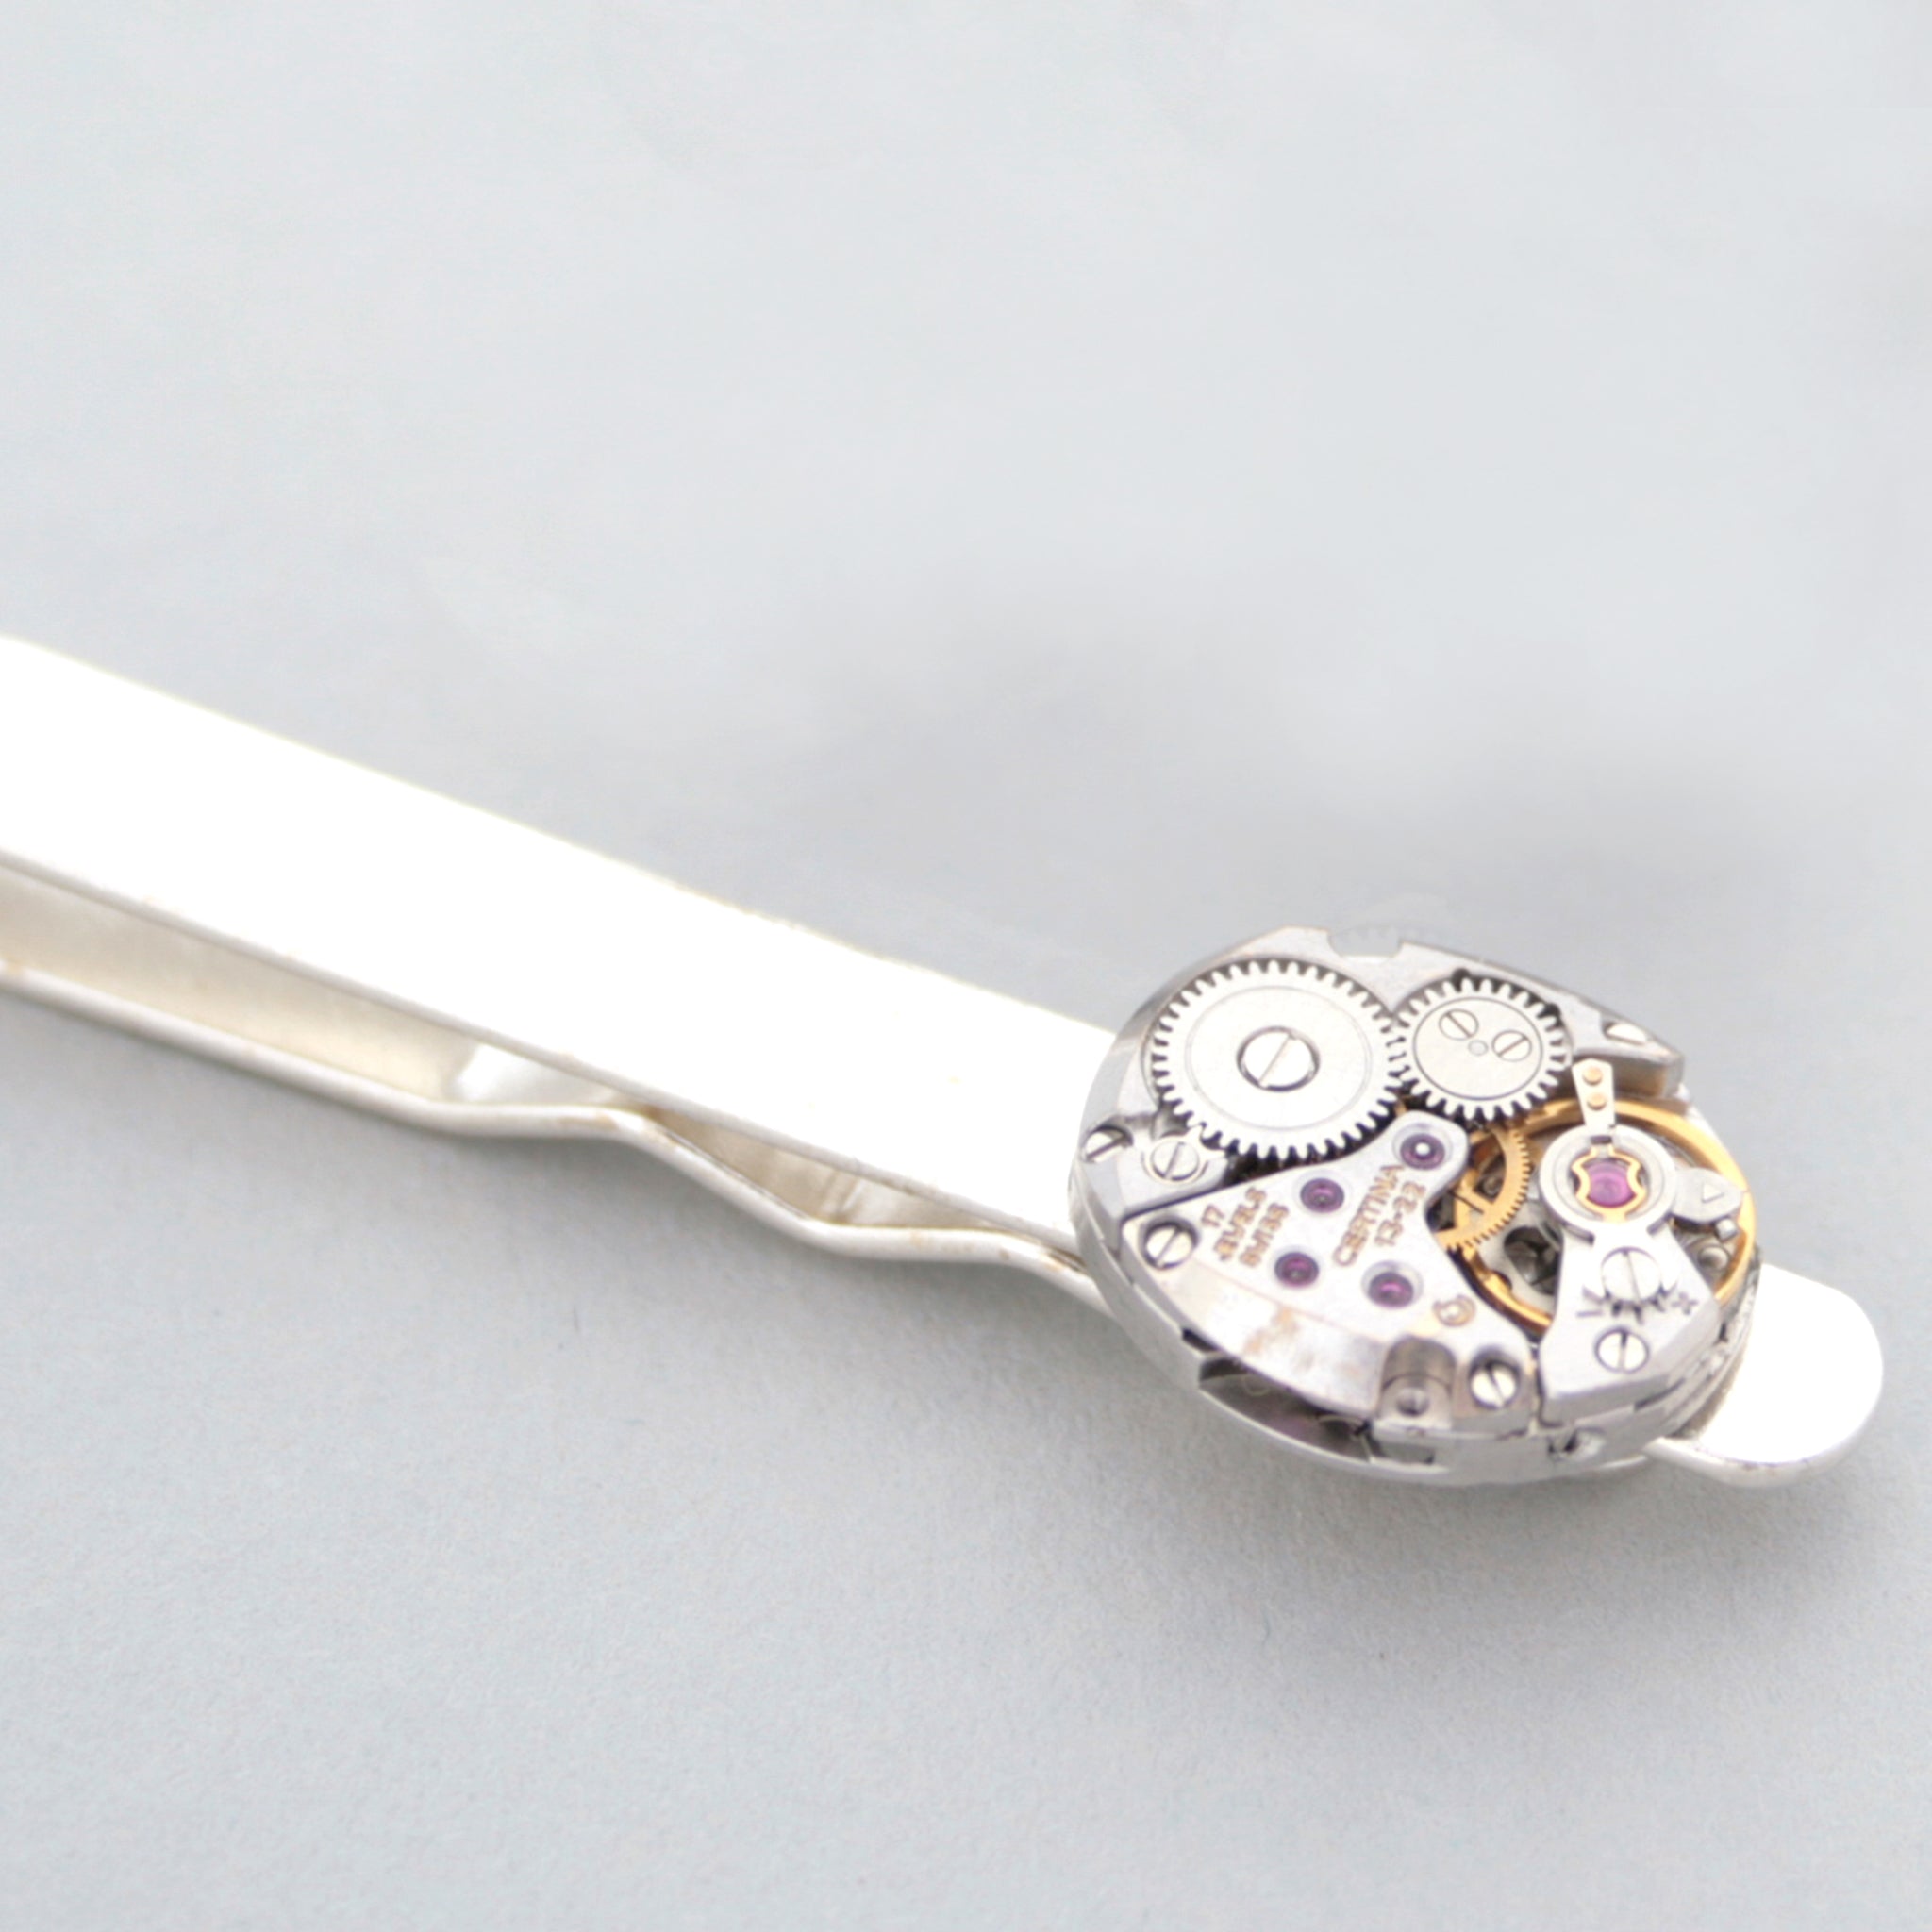 sterling tie clip made of antique Certina watch movement